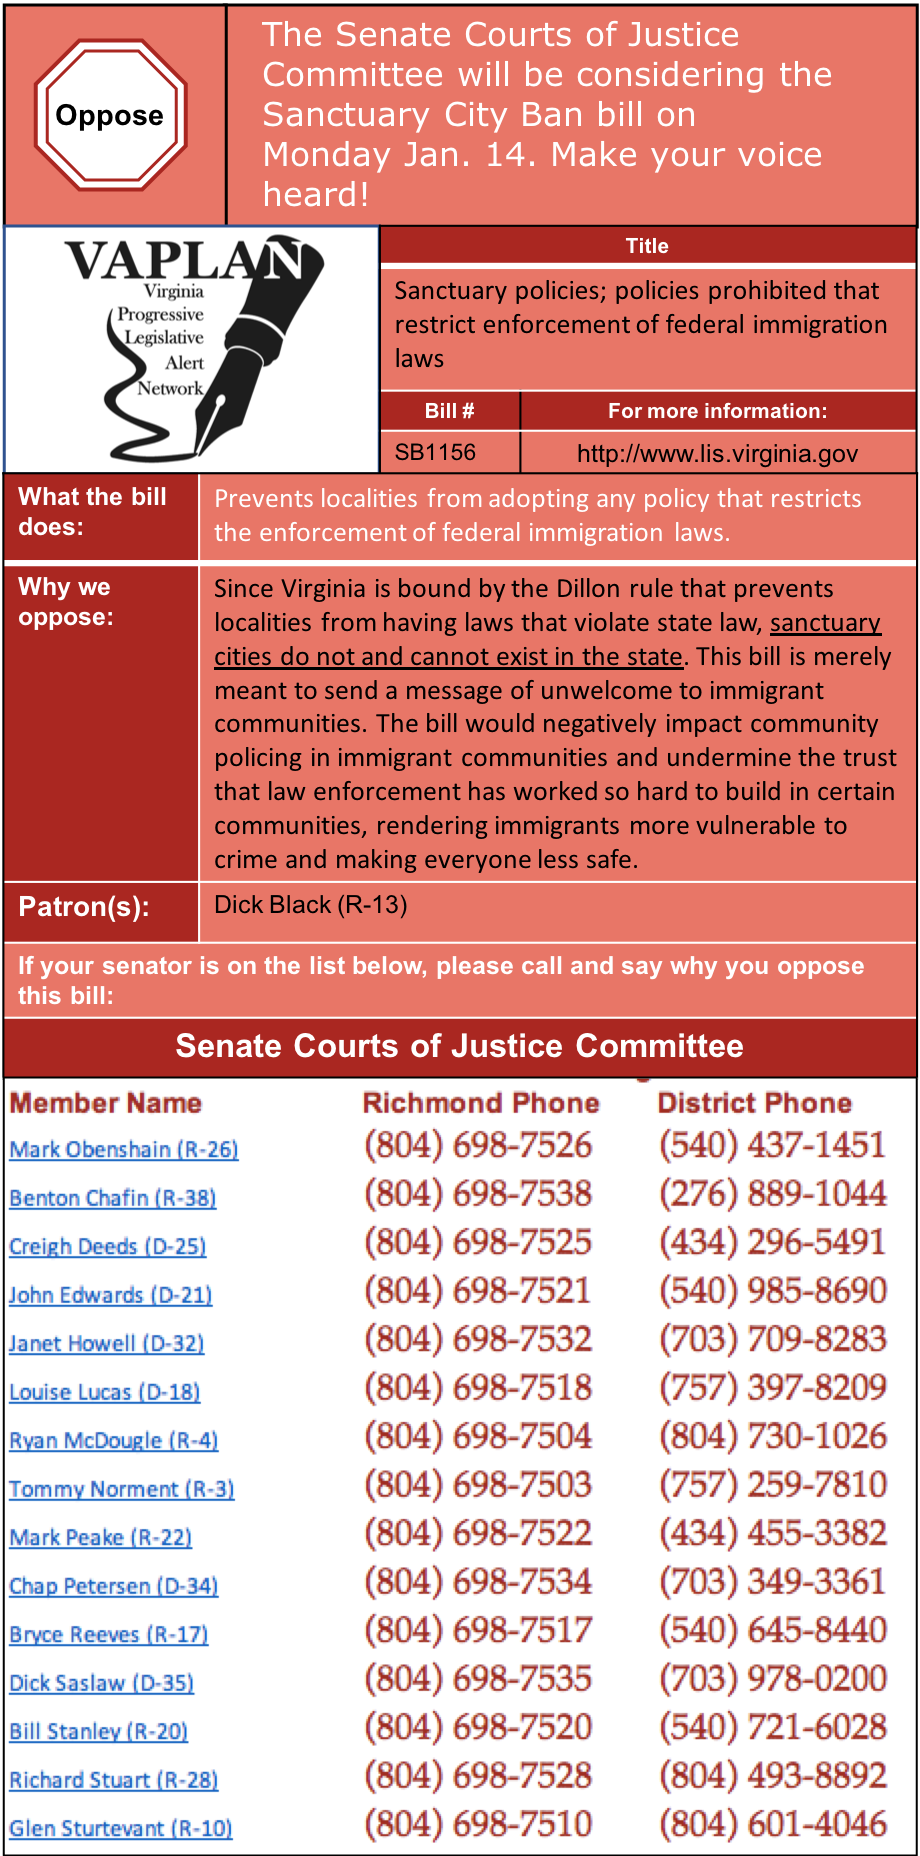 ALERT: Oppose Sanctuary City Ban in Senate Courts of Justice!